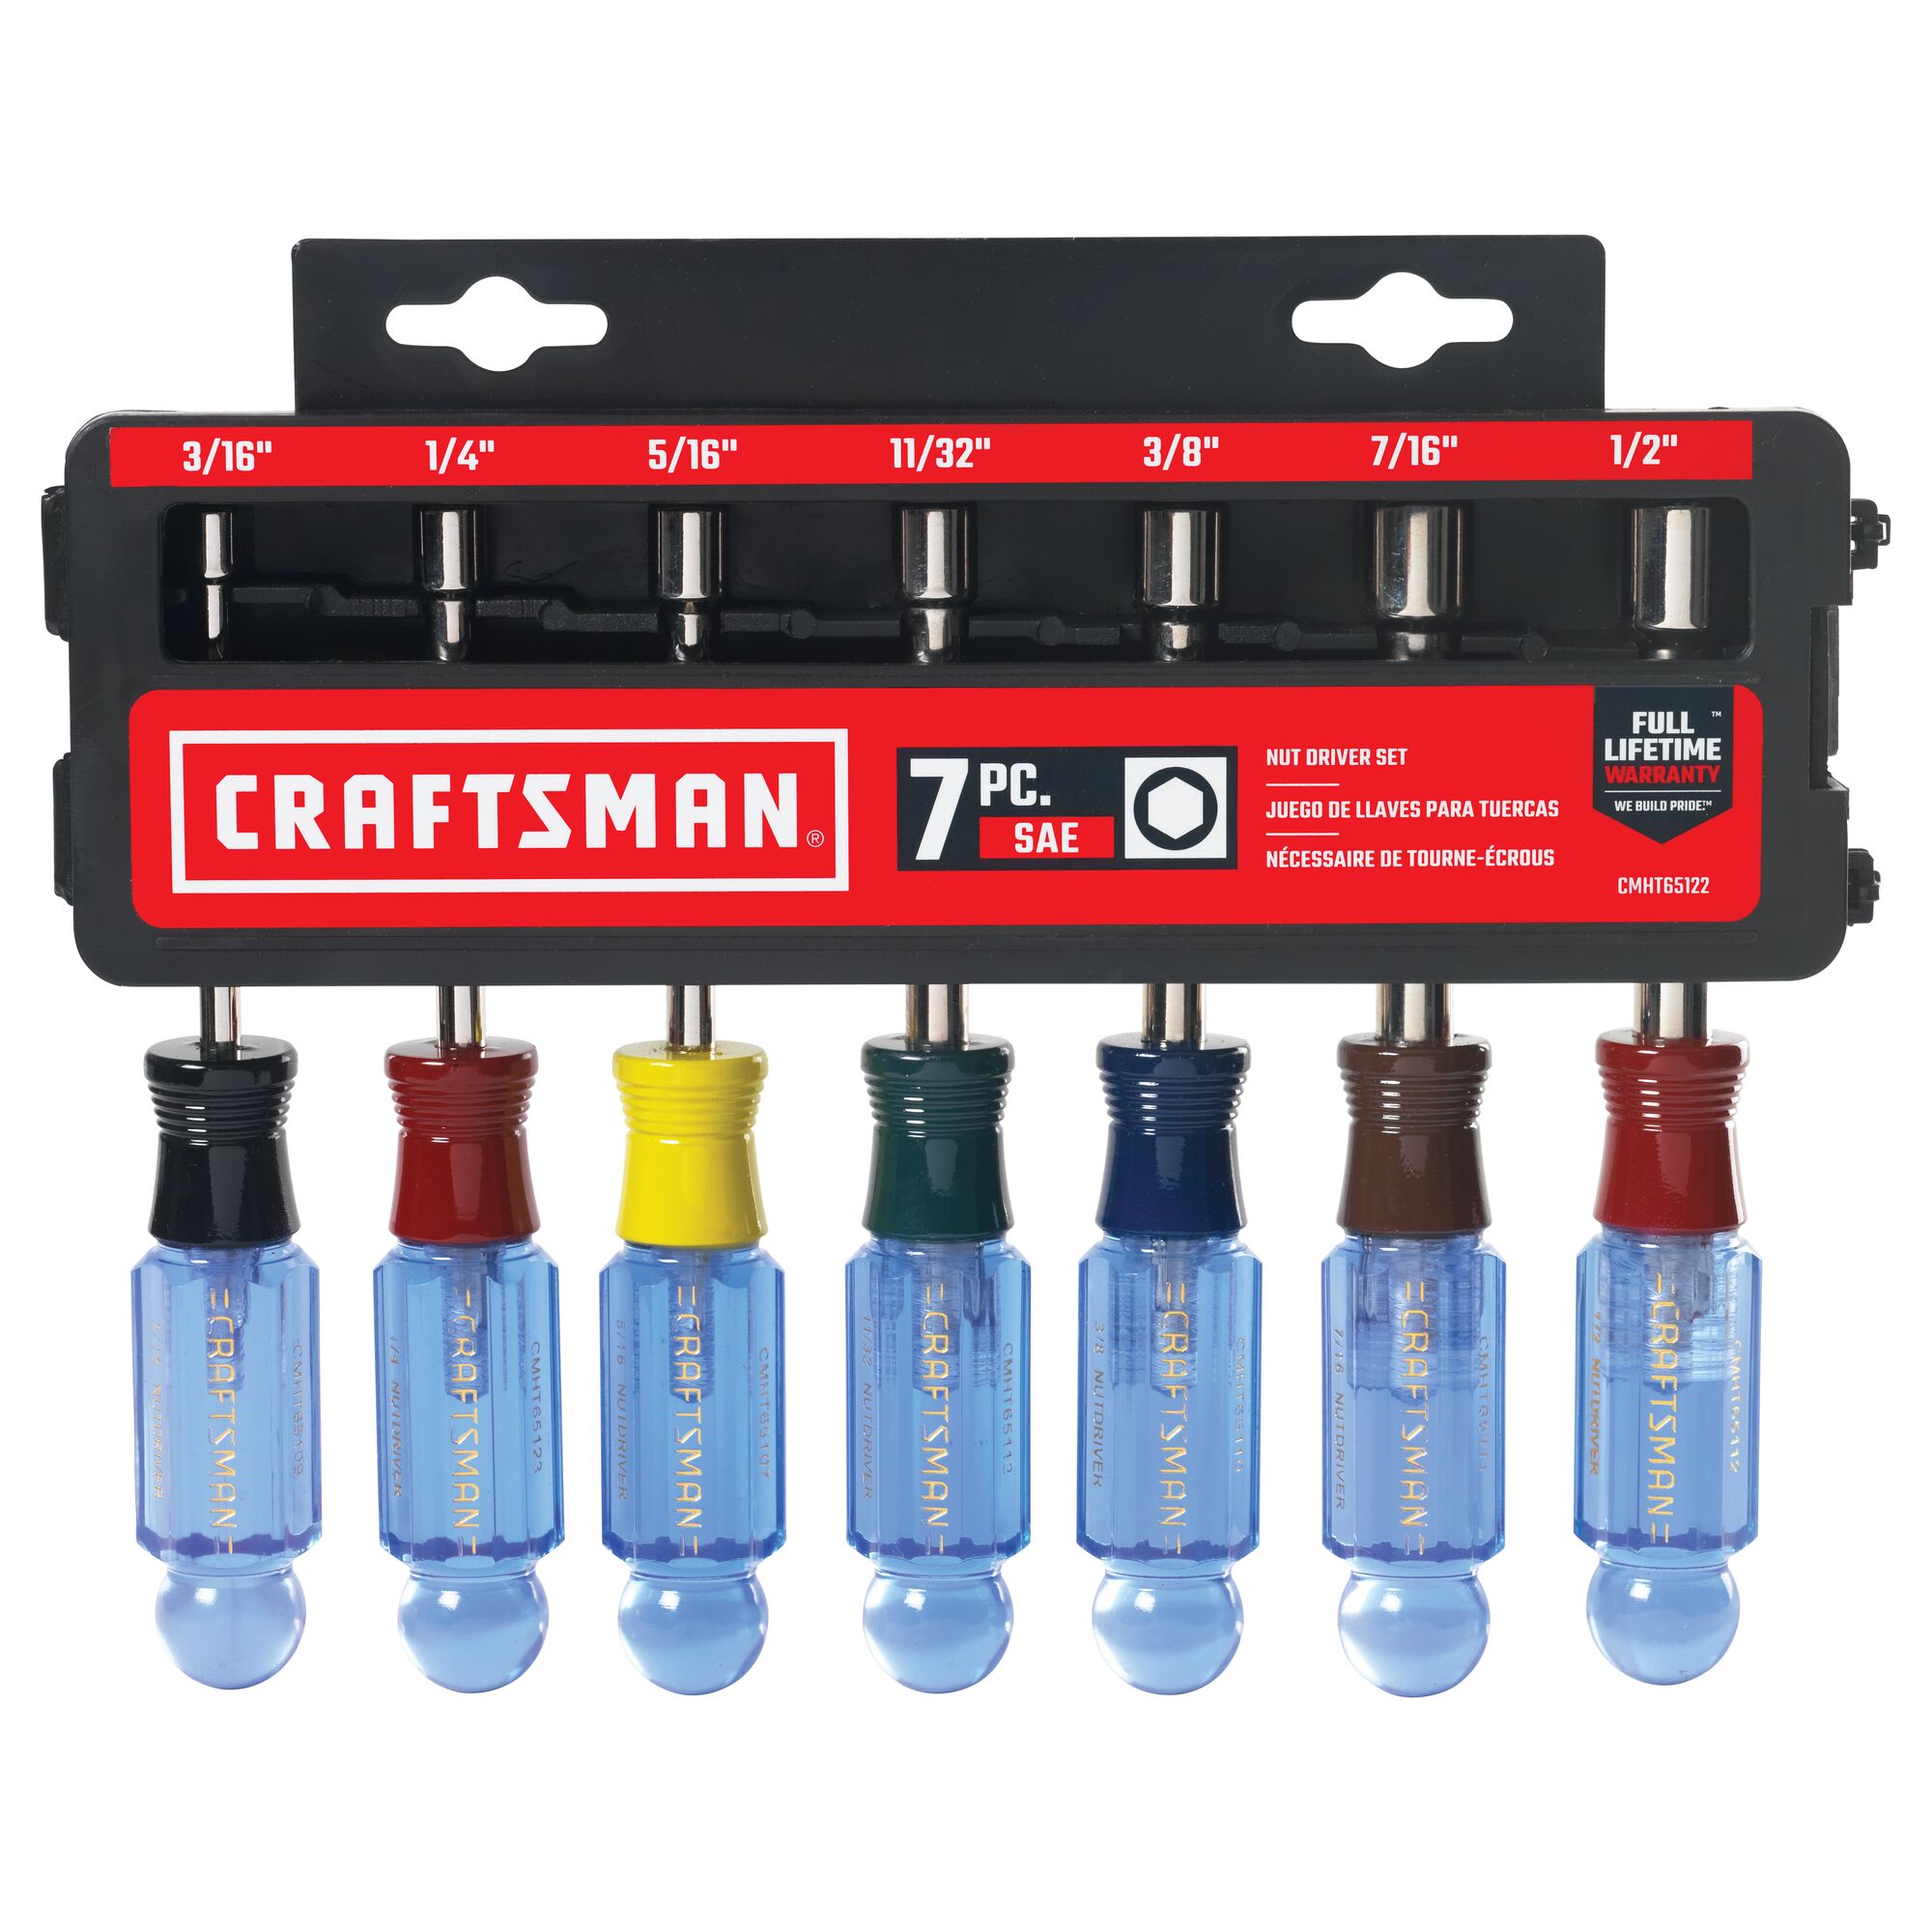 CRAFTSMAN 7 piece SAE nut driver set in packaging